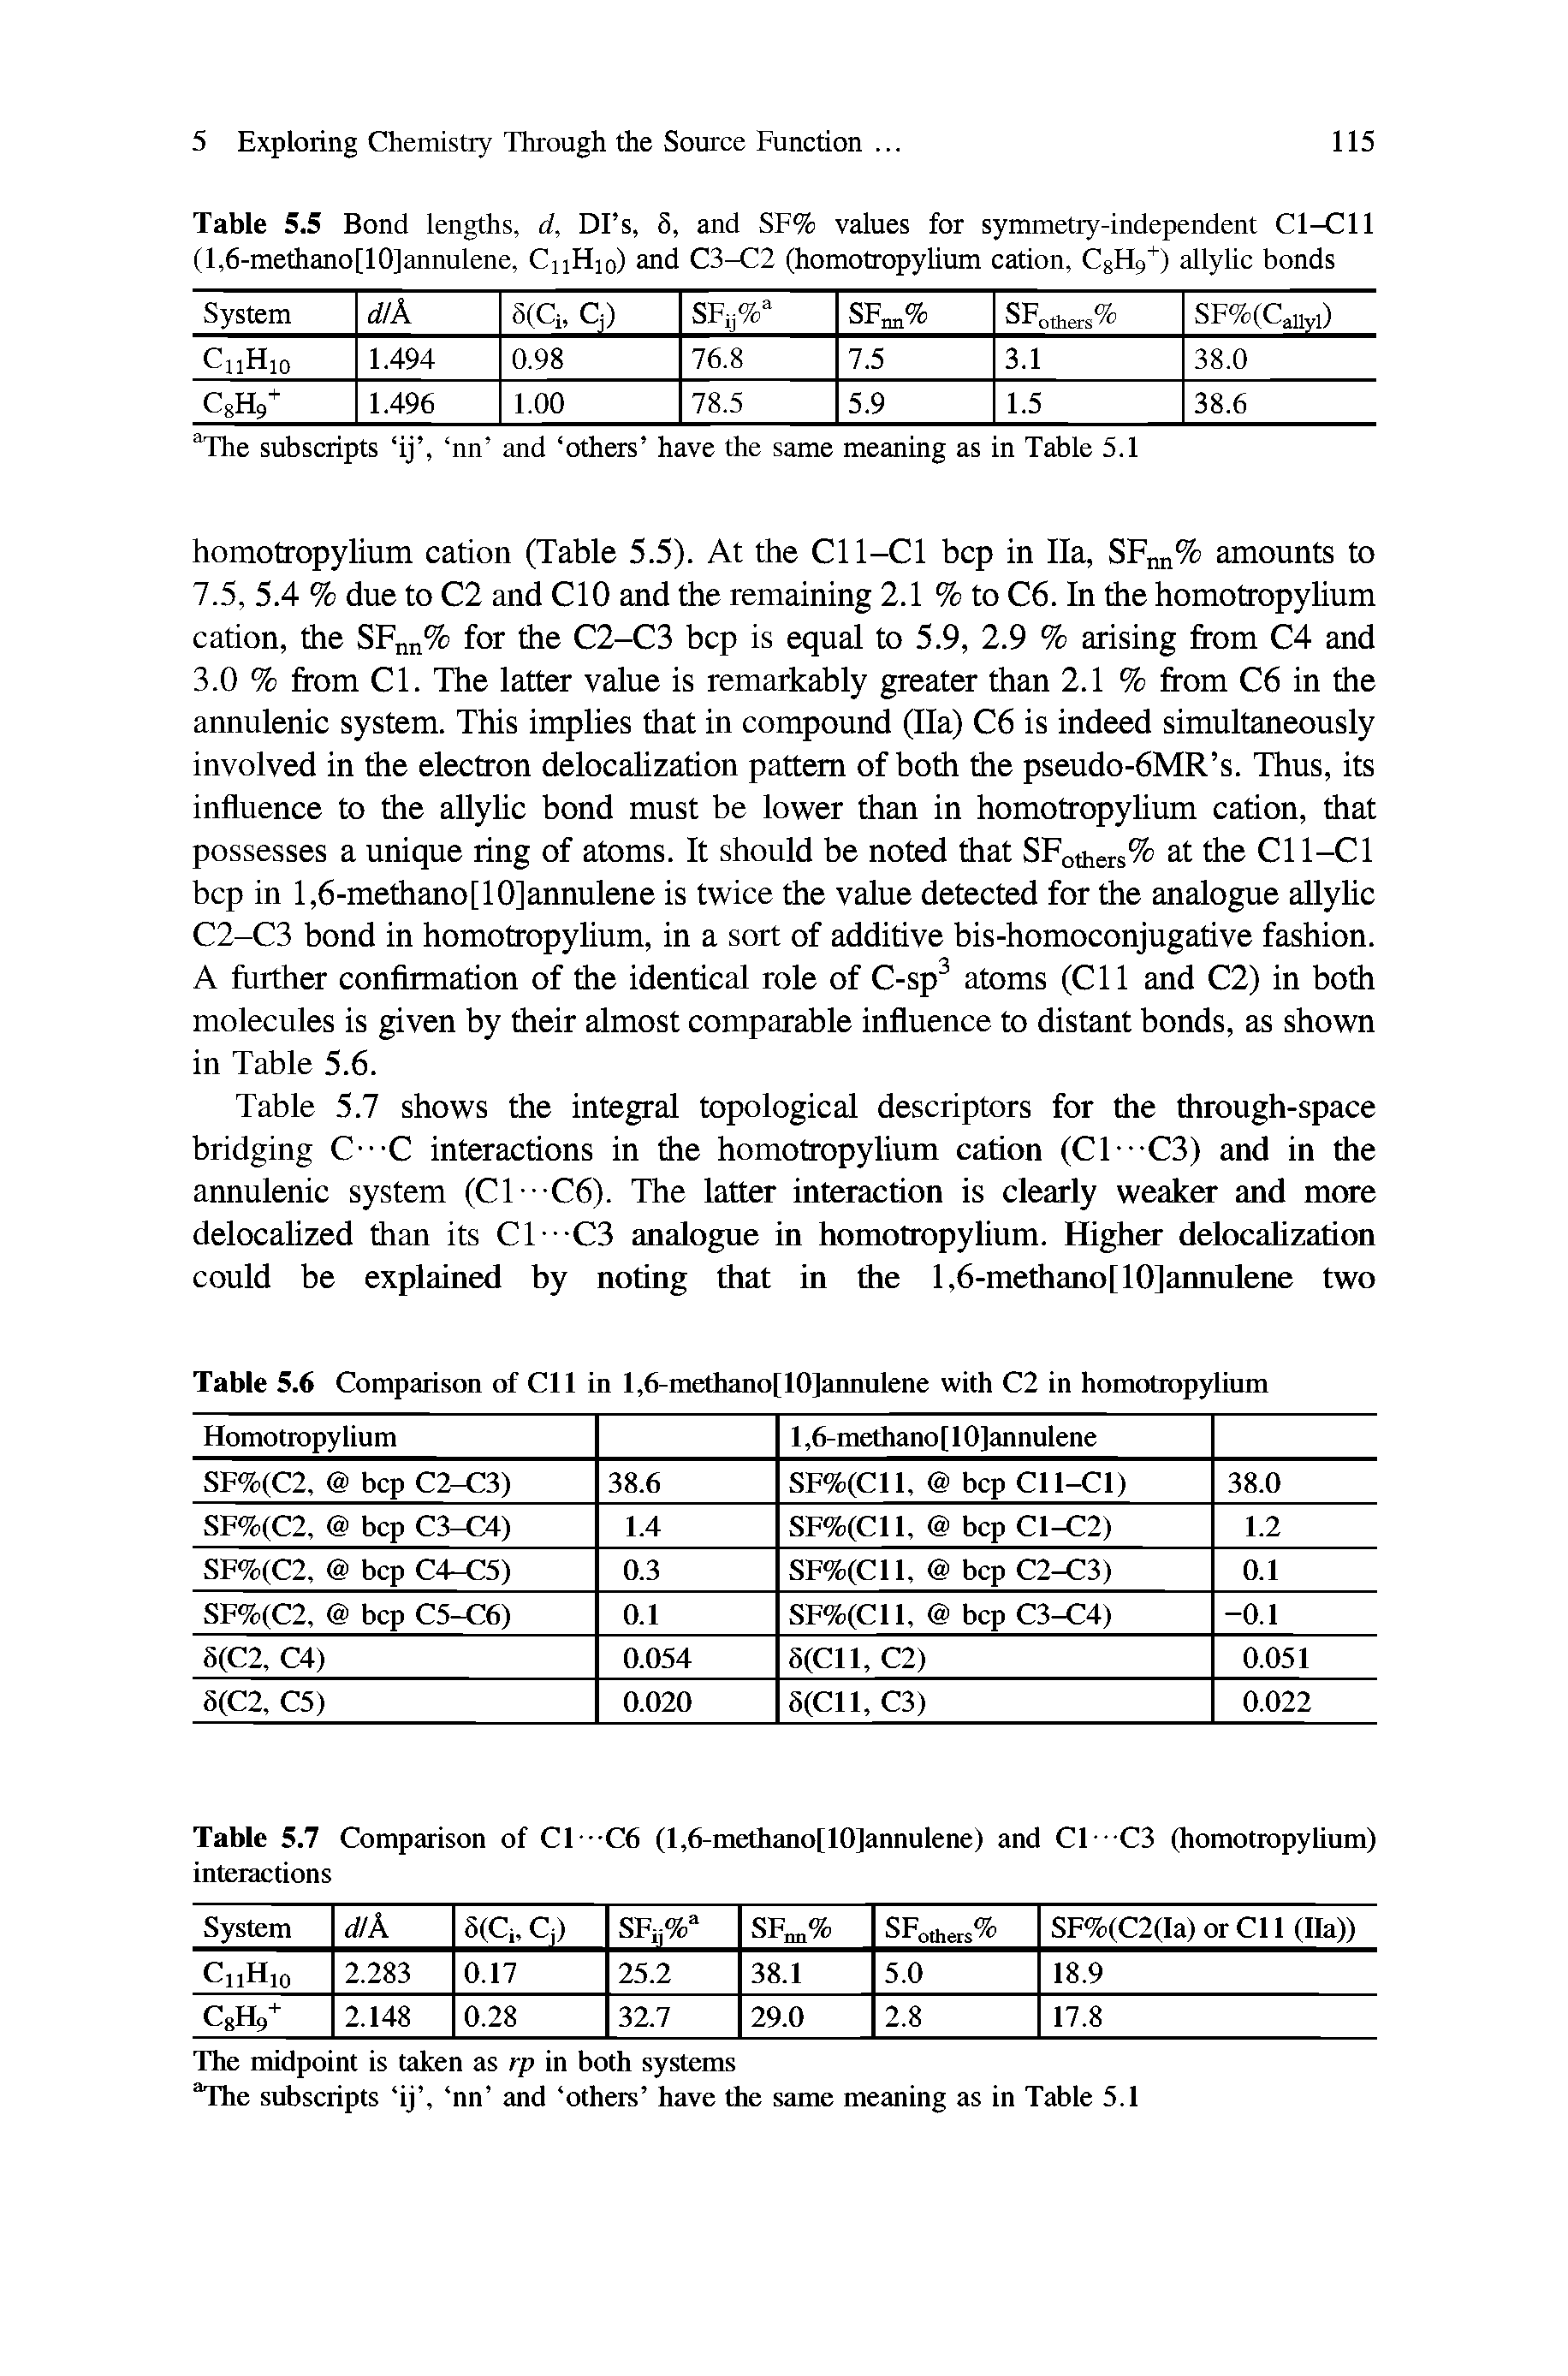 Table 5.5 Bond lengths, d, DTs, 5, and SF% values for symmetry-independent Cl-Cll (l,6-methano[10]annulene, CnHio) and C3-C2 (homotropylium cation, CgHg ) allylic bonds...